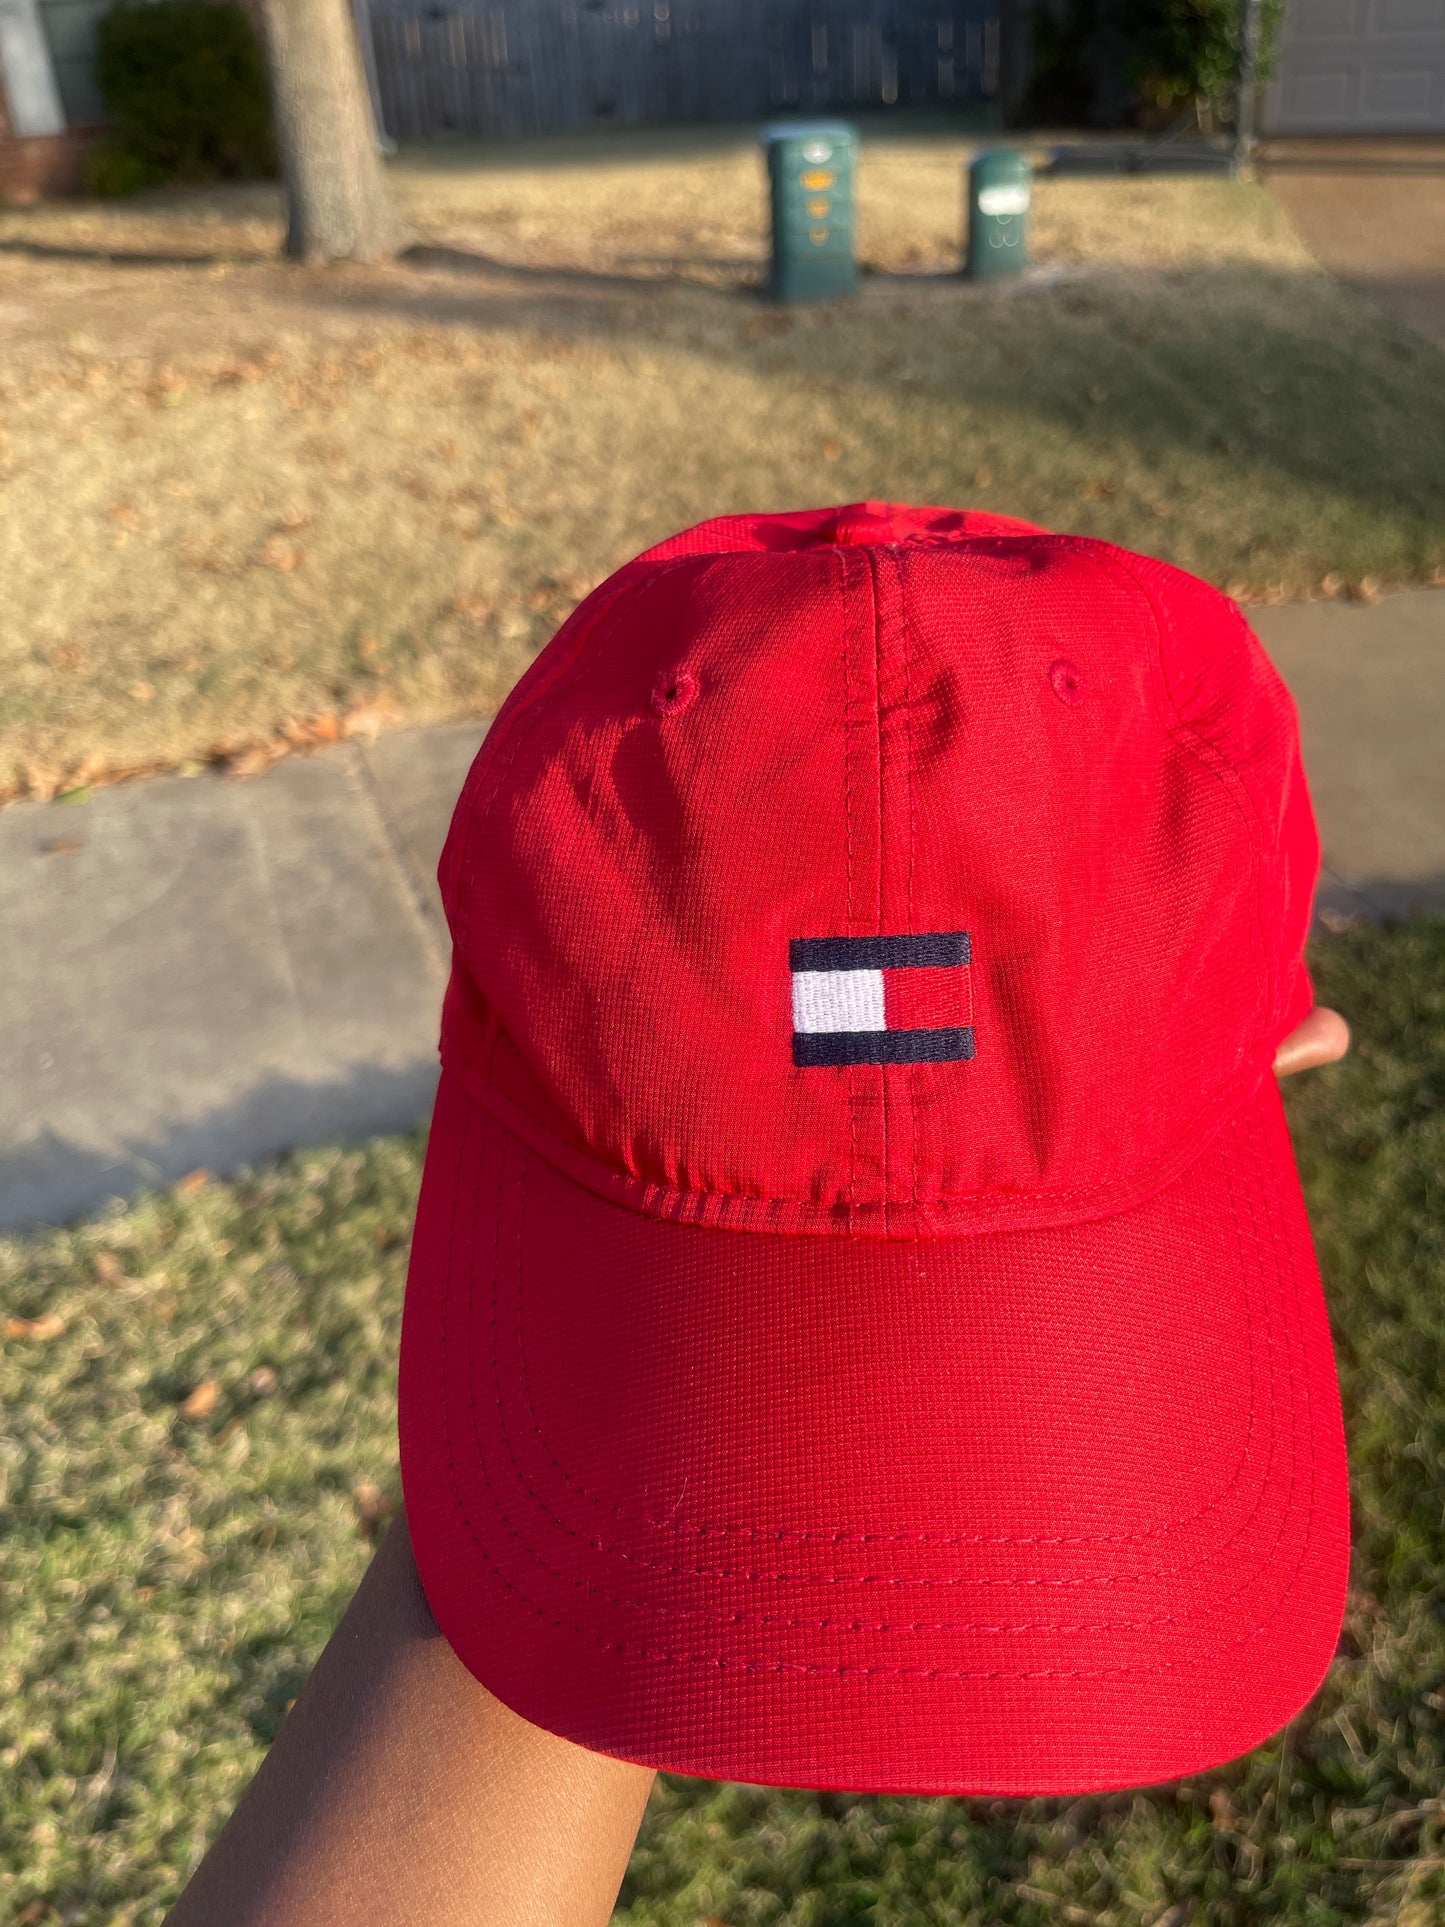 Tommy Hilfiger cap red adults one size